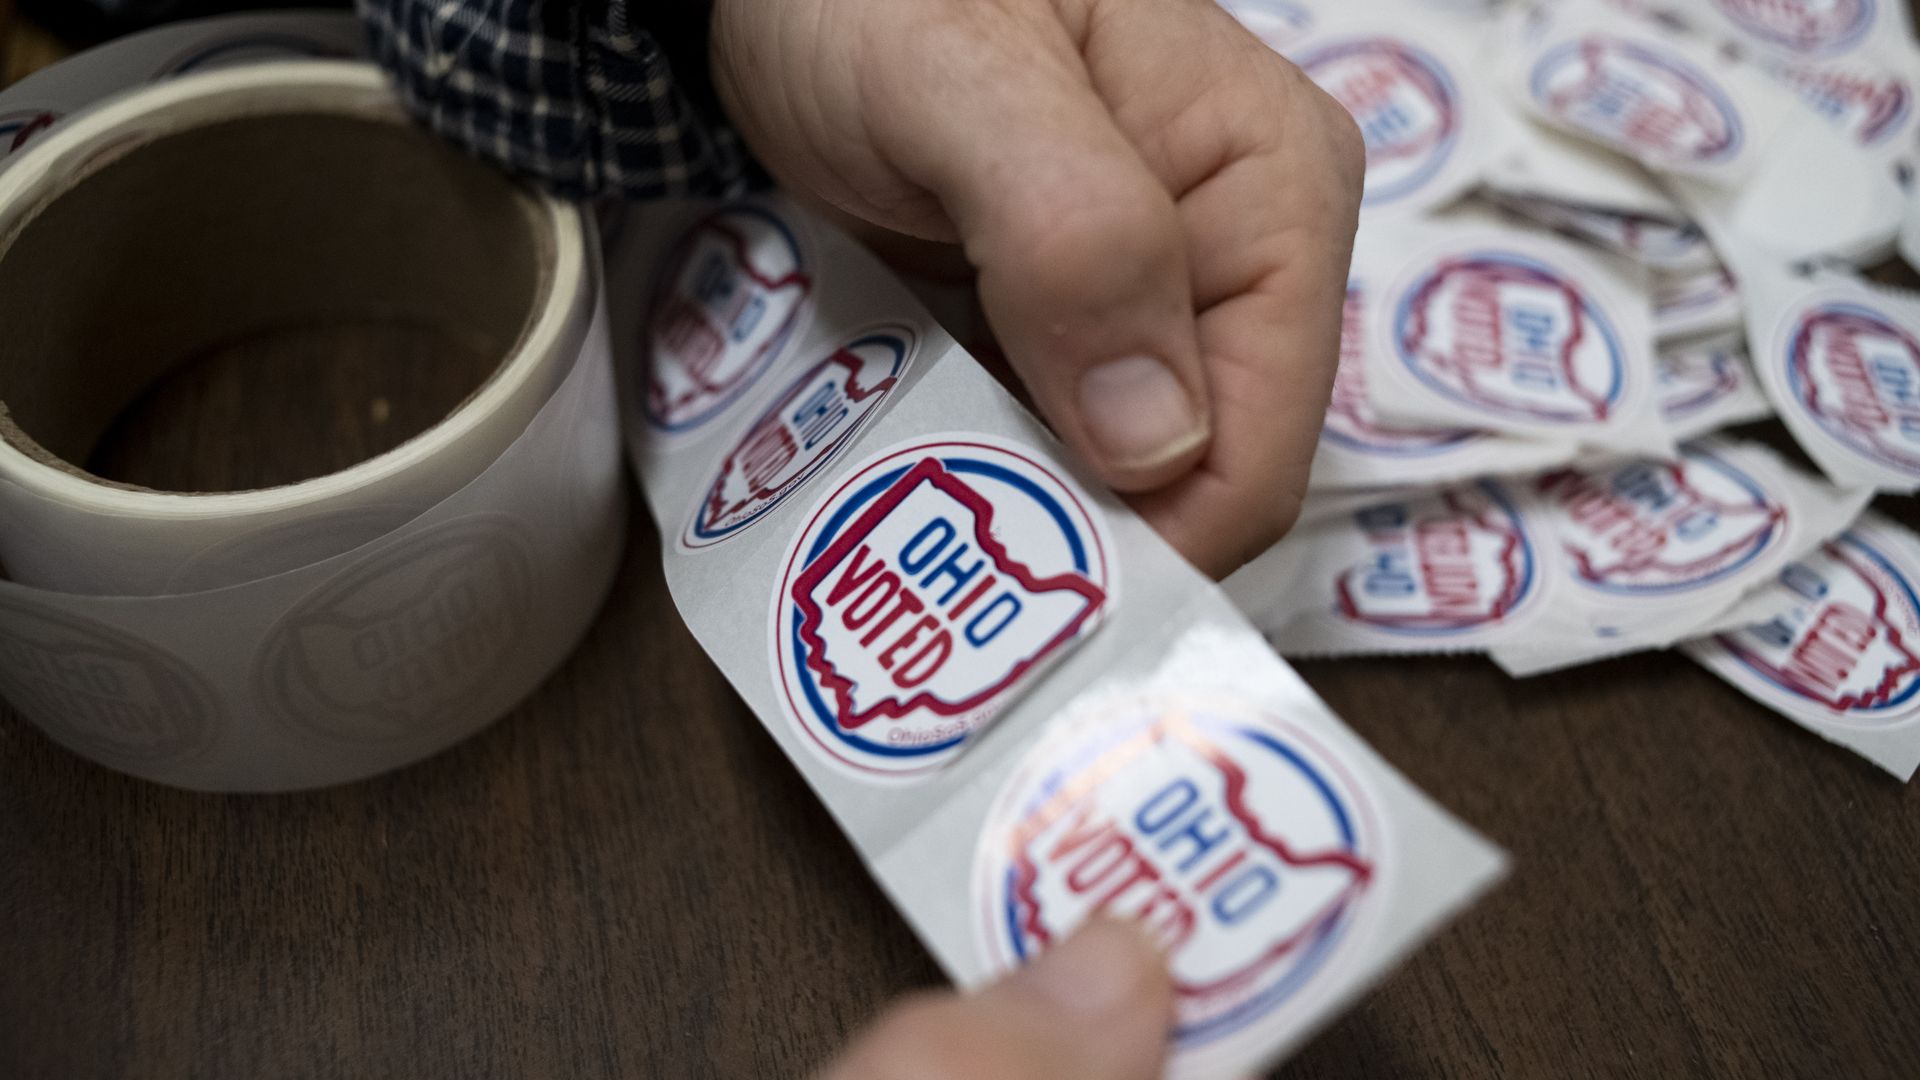 A hand holding a sticker that reads "Ohio voted".